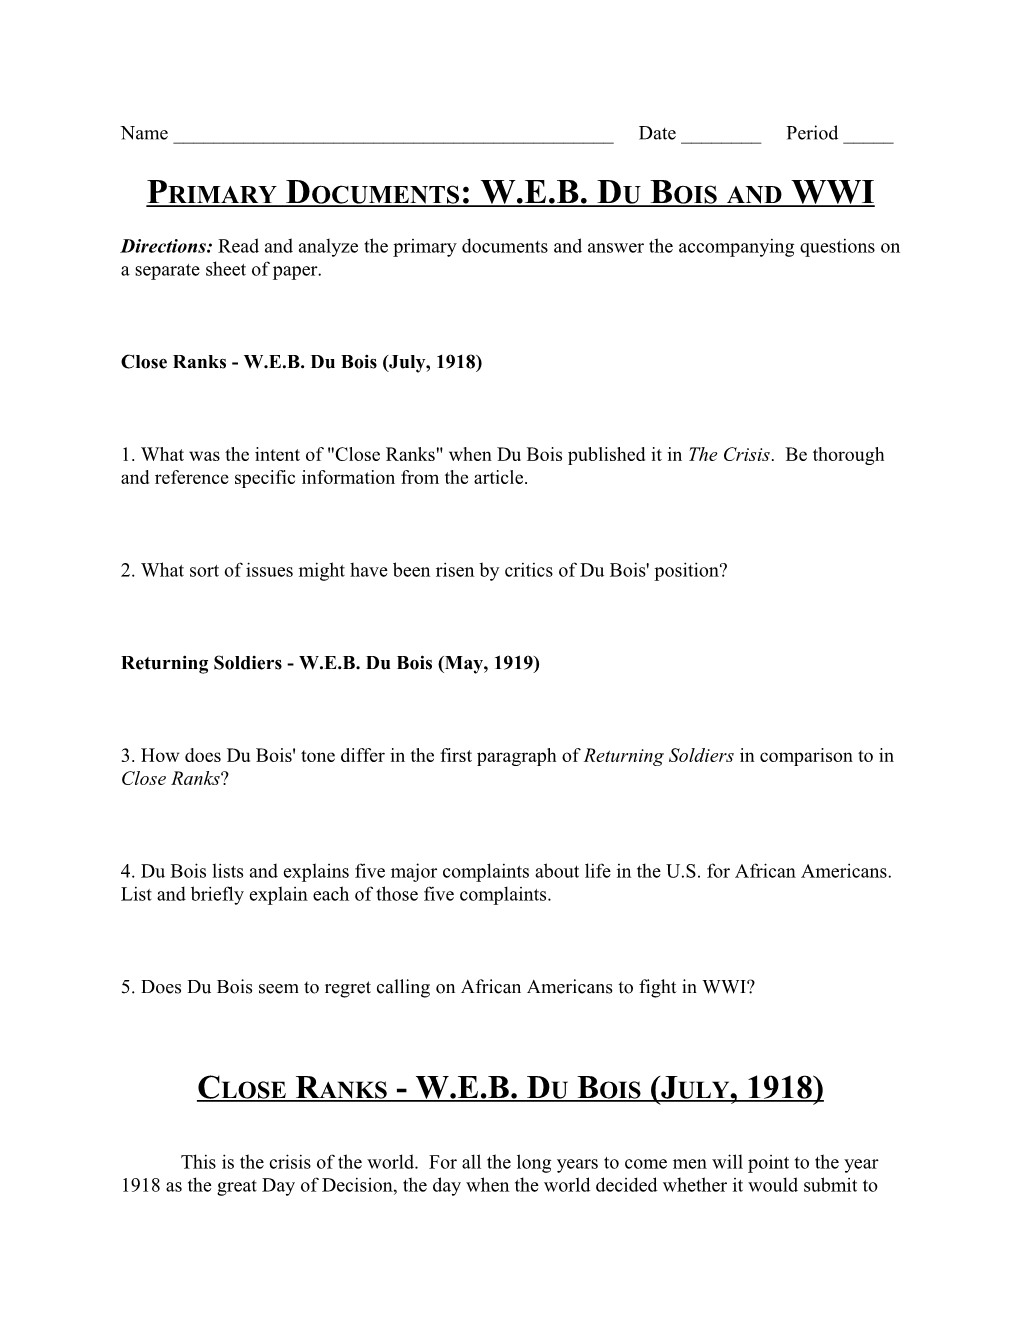 Primary Documents: W.E.B. Du Bois and WWI